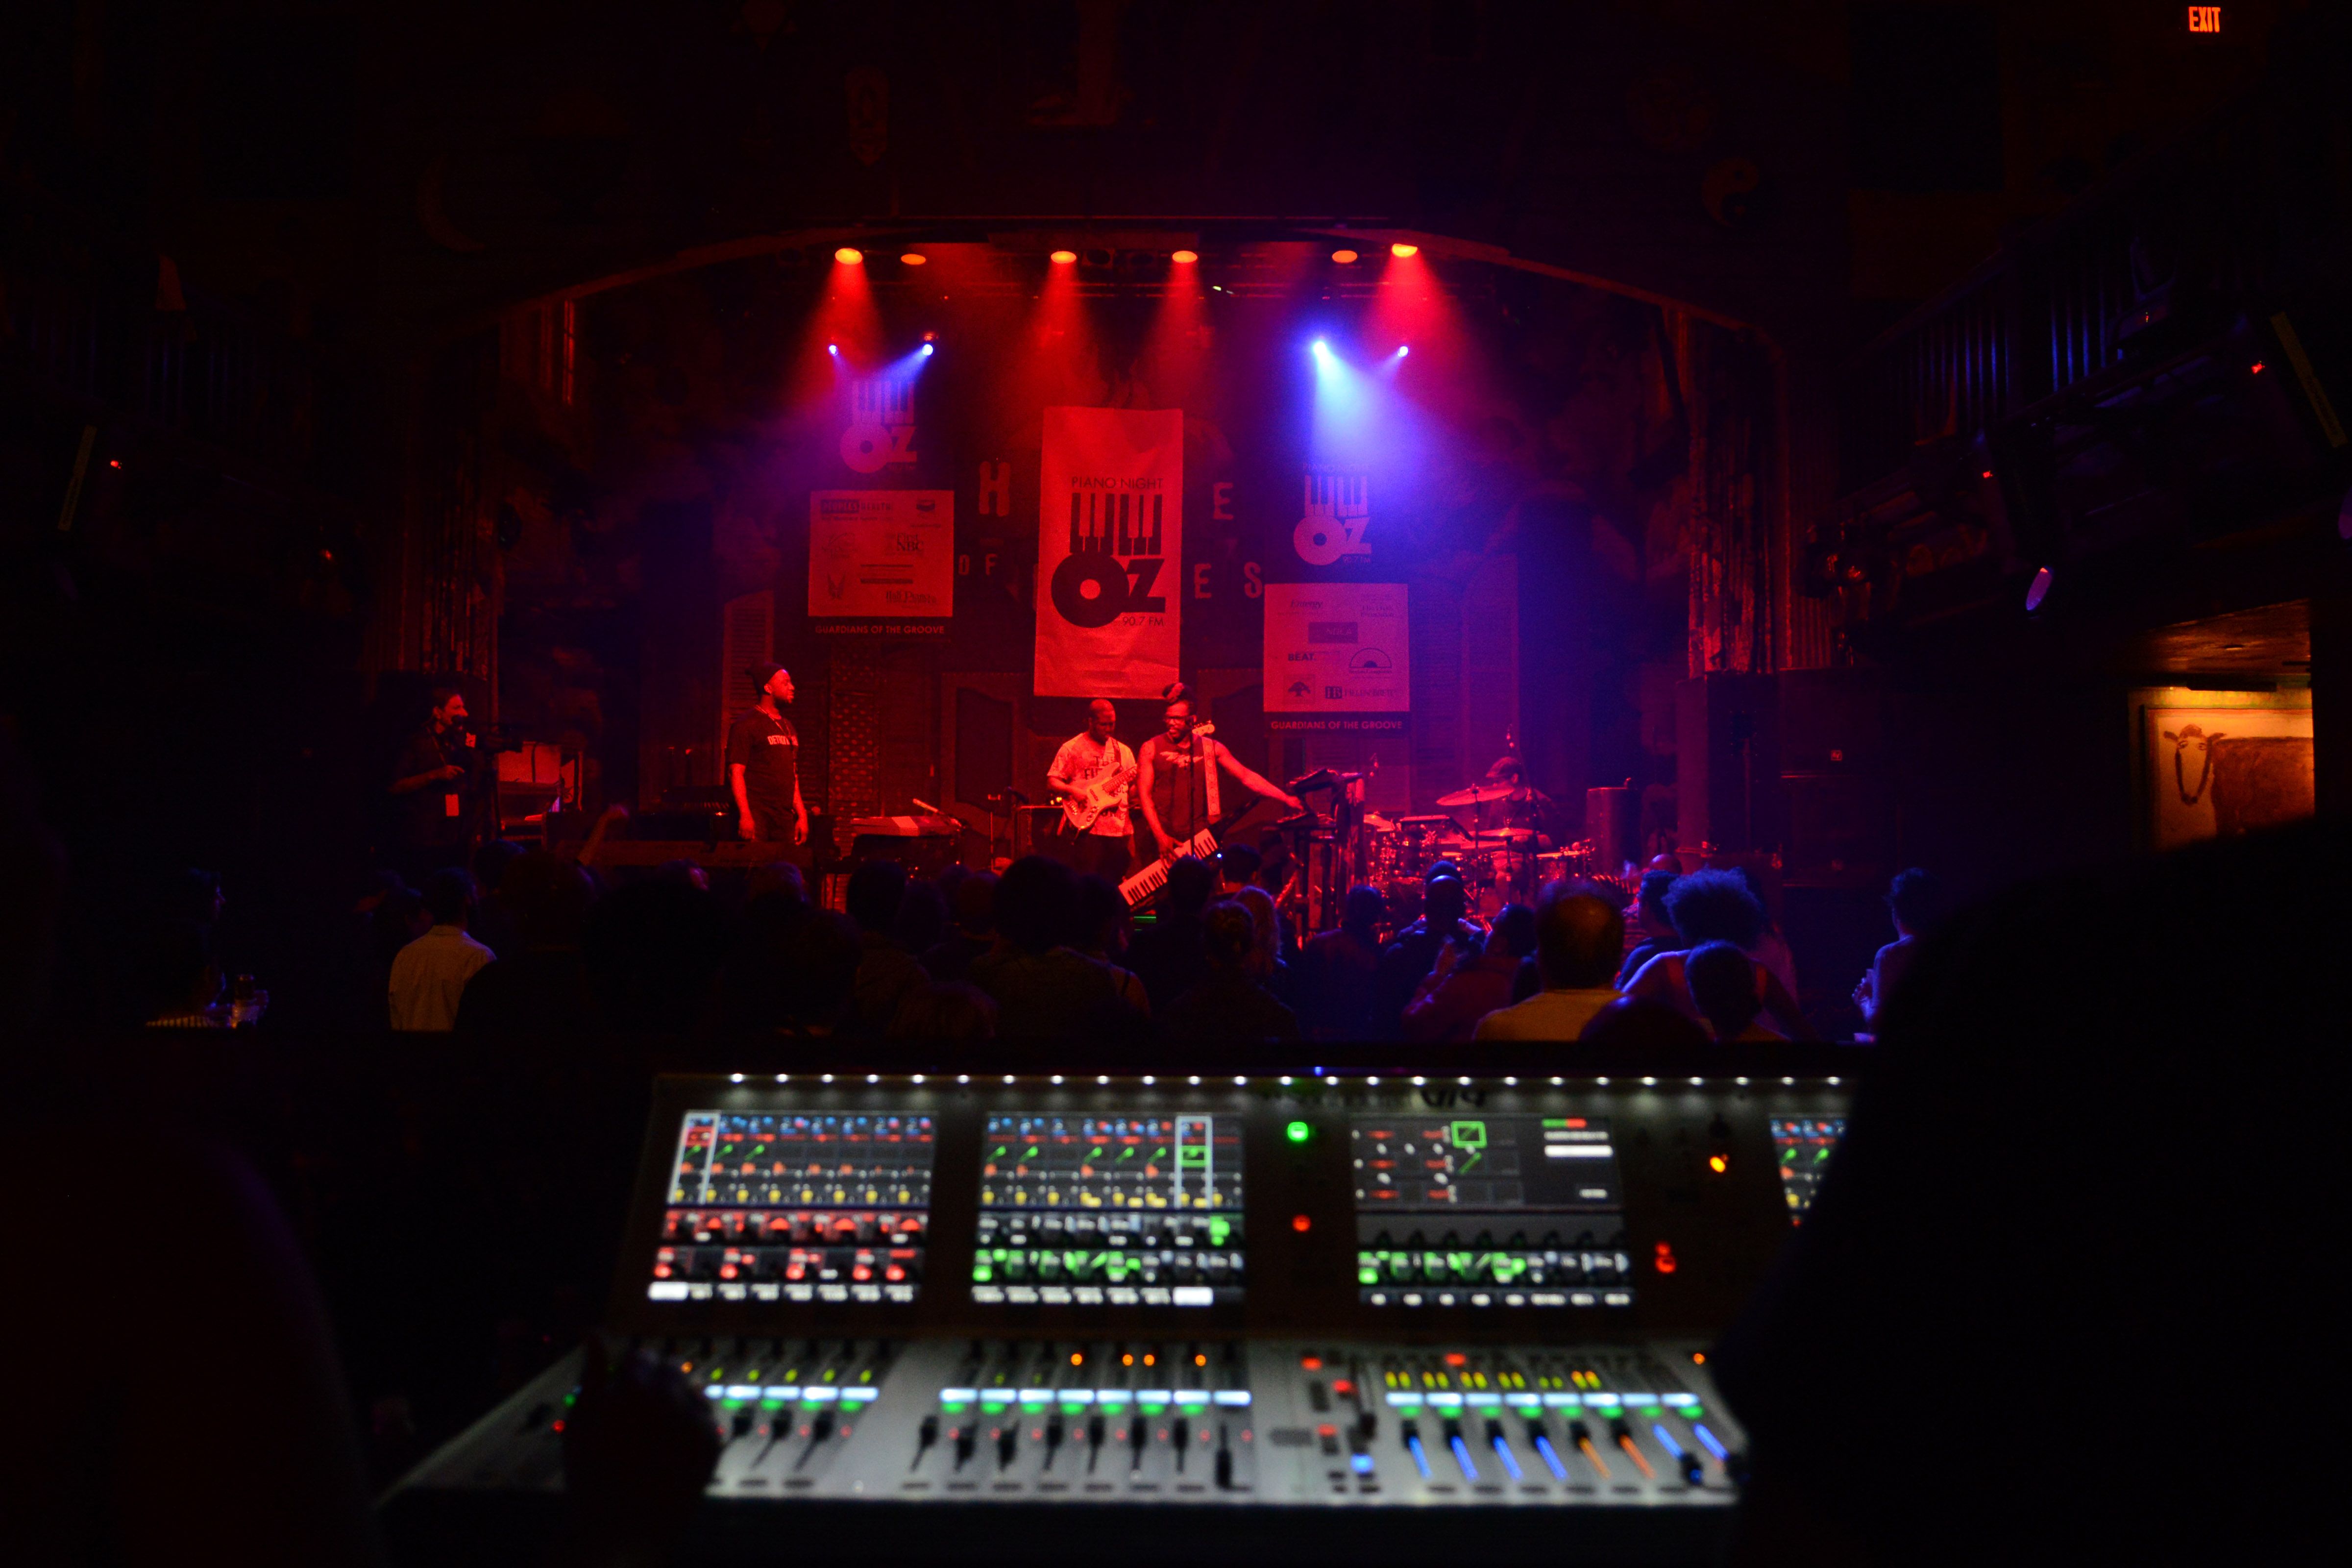 In the background, Robert Glasper performs with his band onstage. In the foreground, sound board controls are lit up in a dark venue.